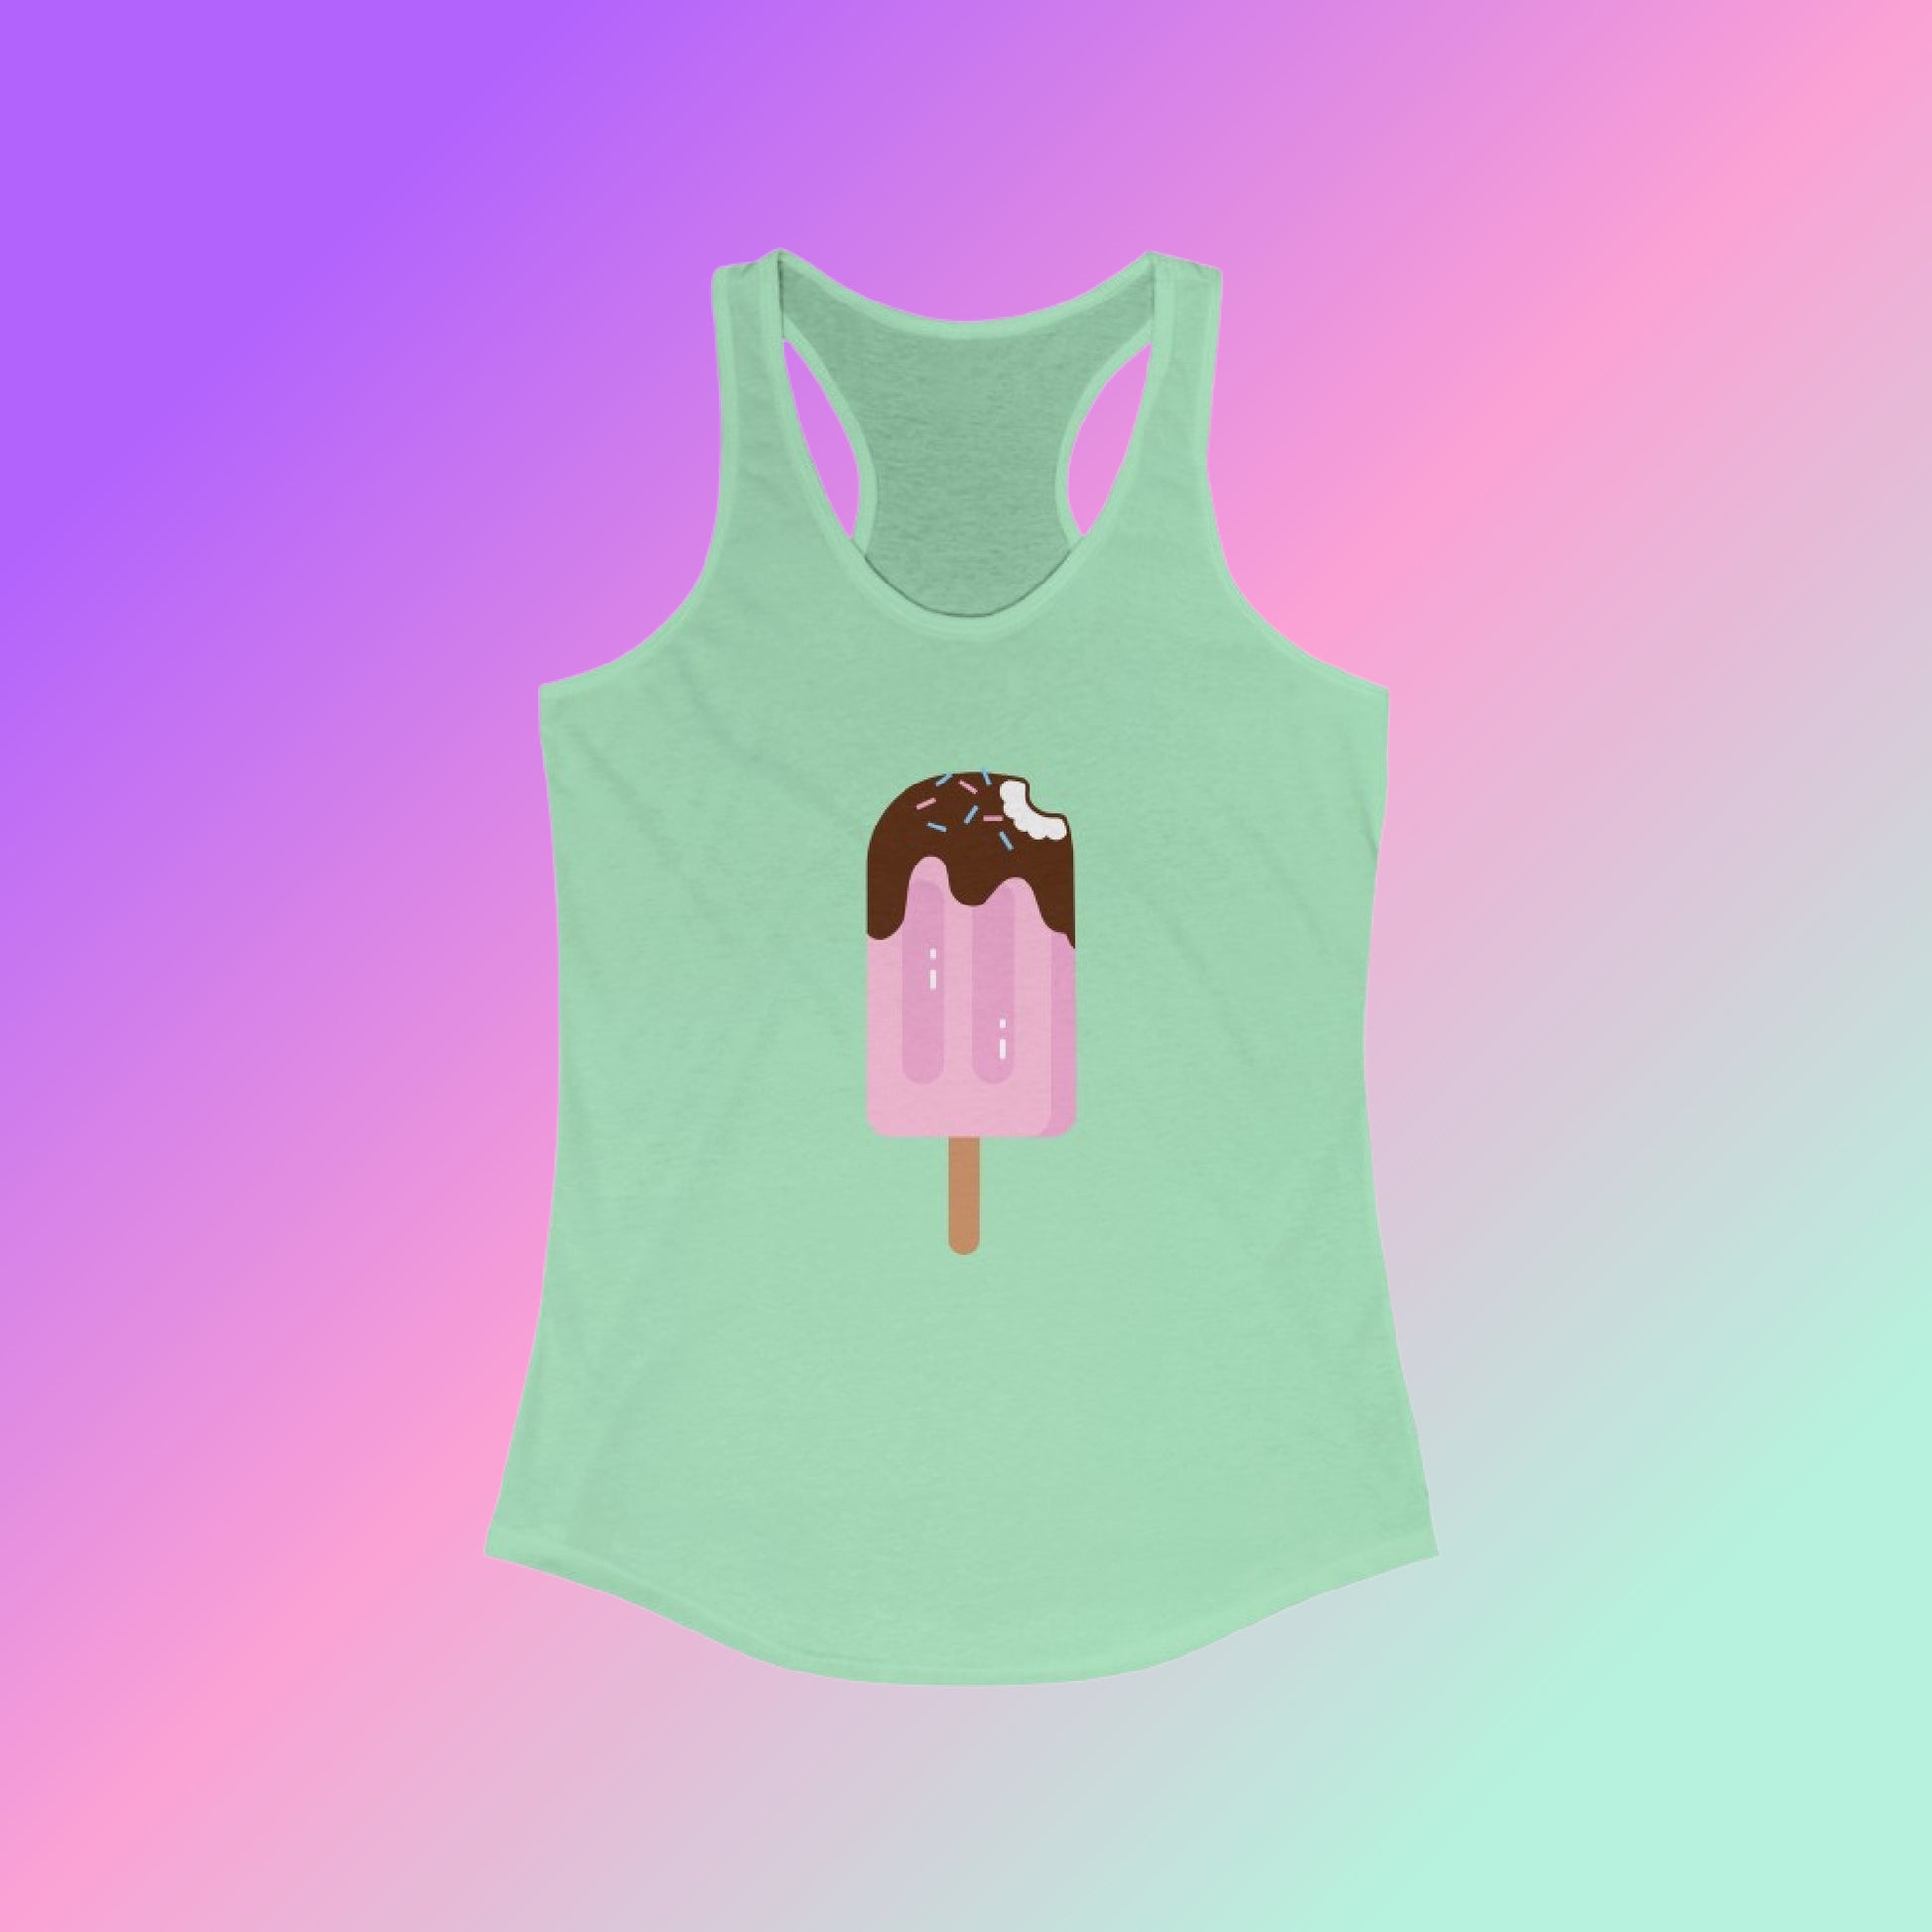 Flat front view of the Mint tank top